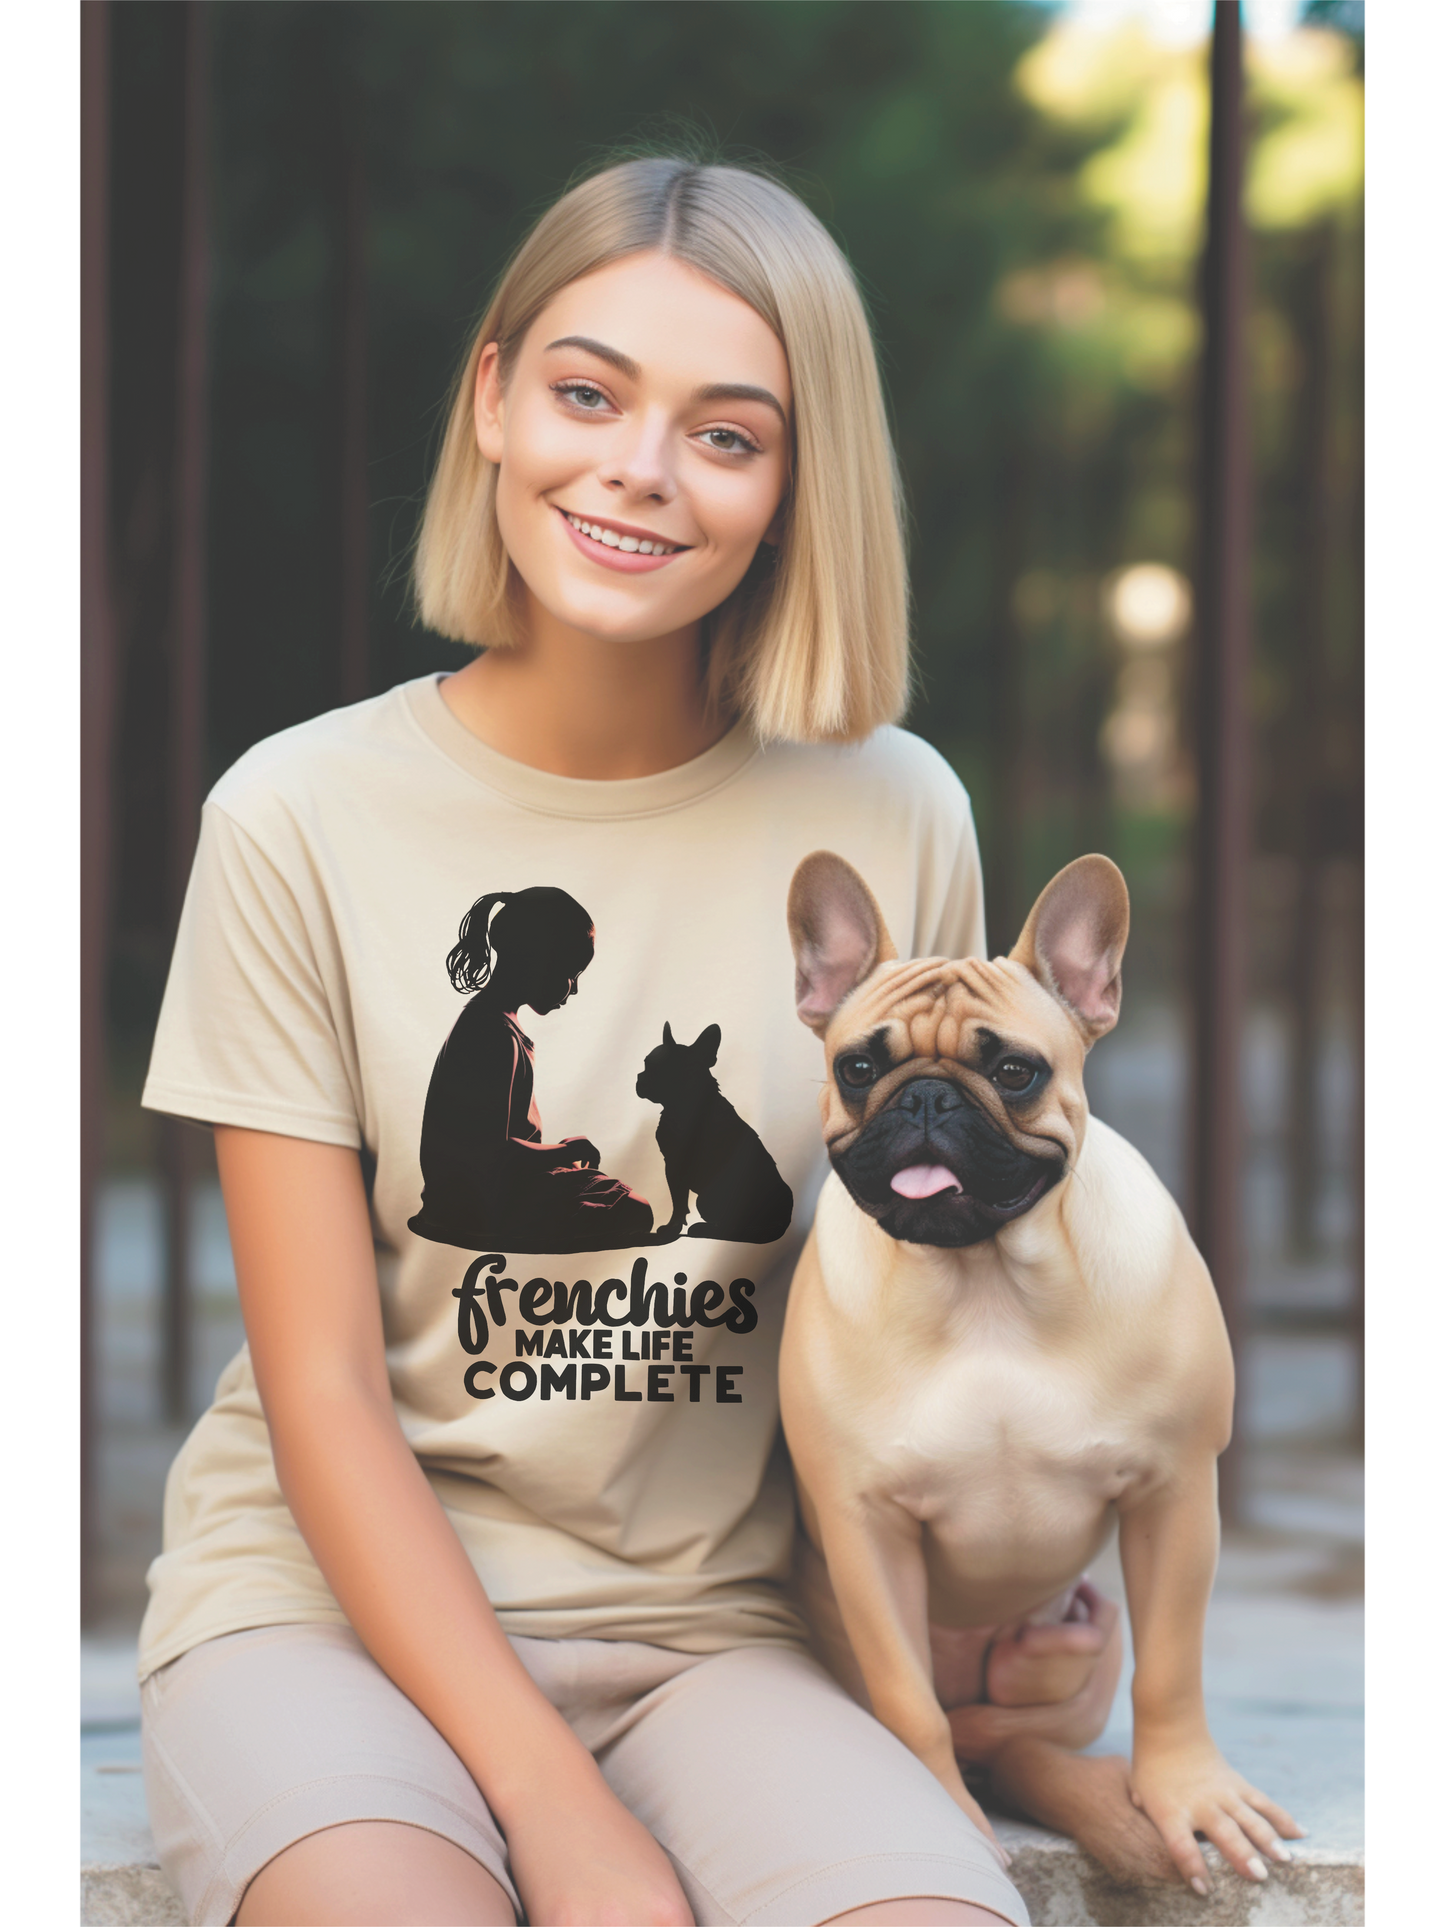 Frenchies Make Life Complete, French Bulldog and Girl Silhouette, Dog Lover